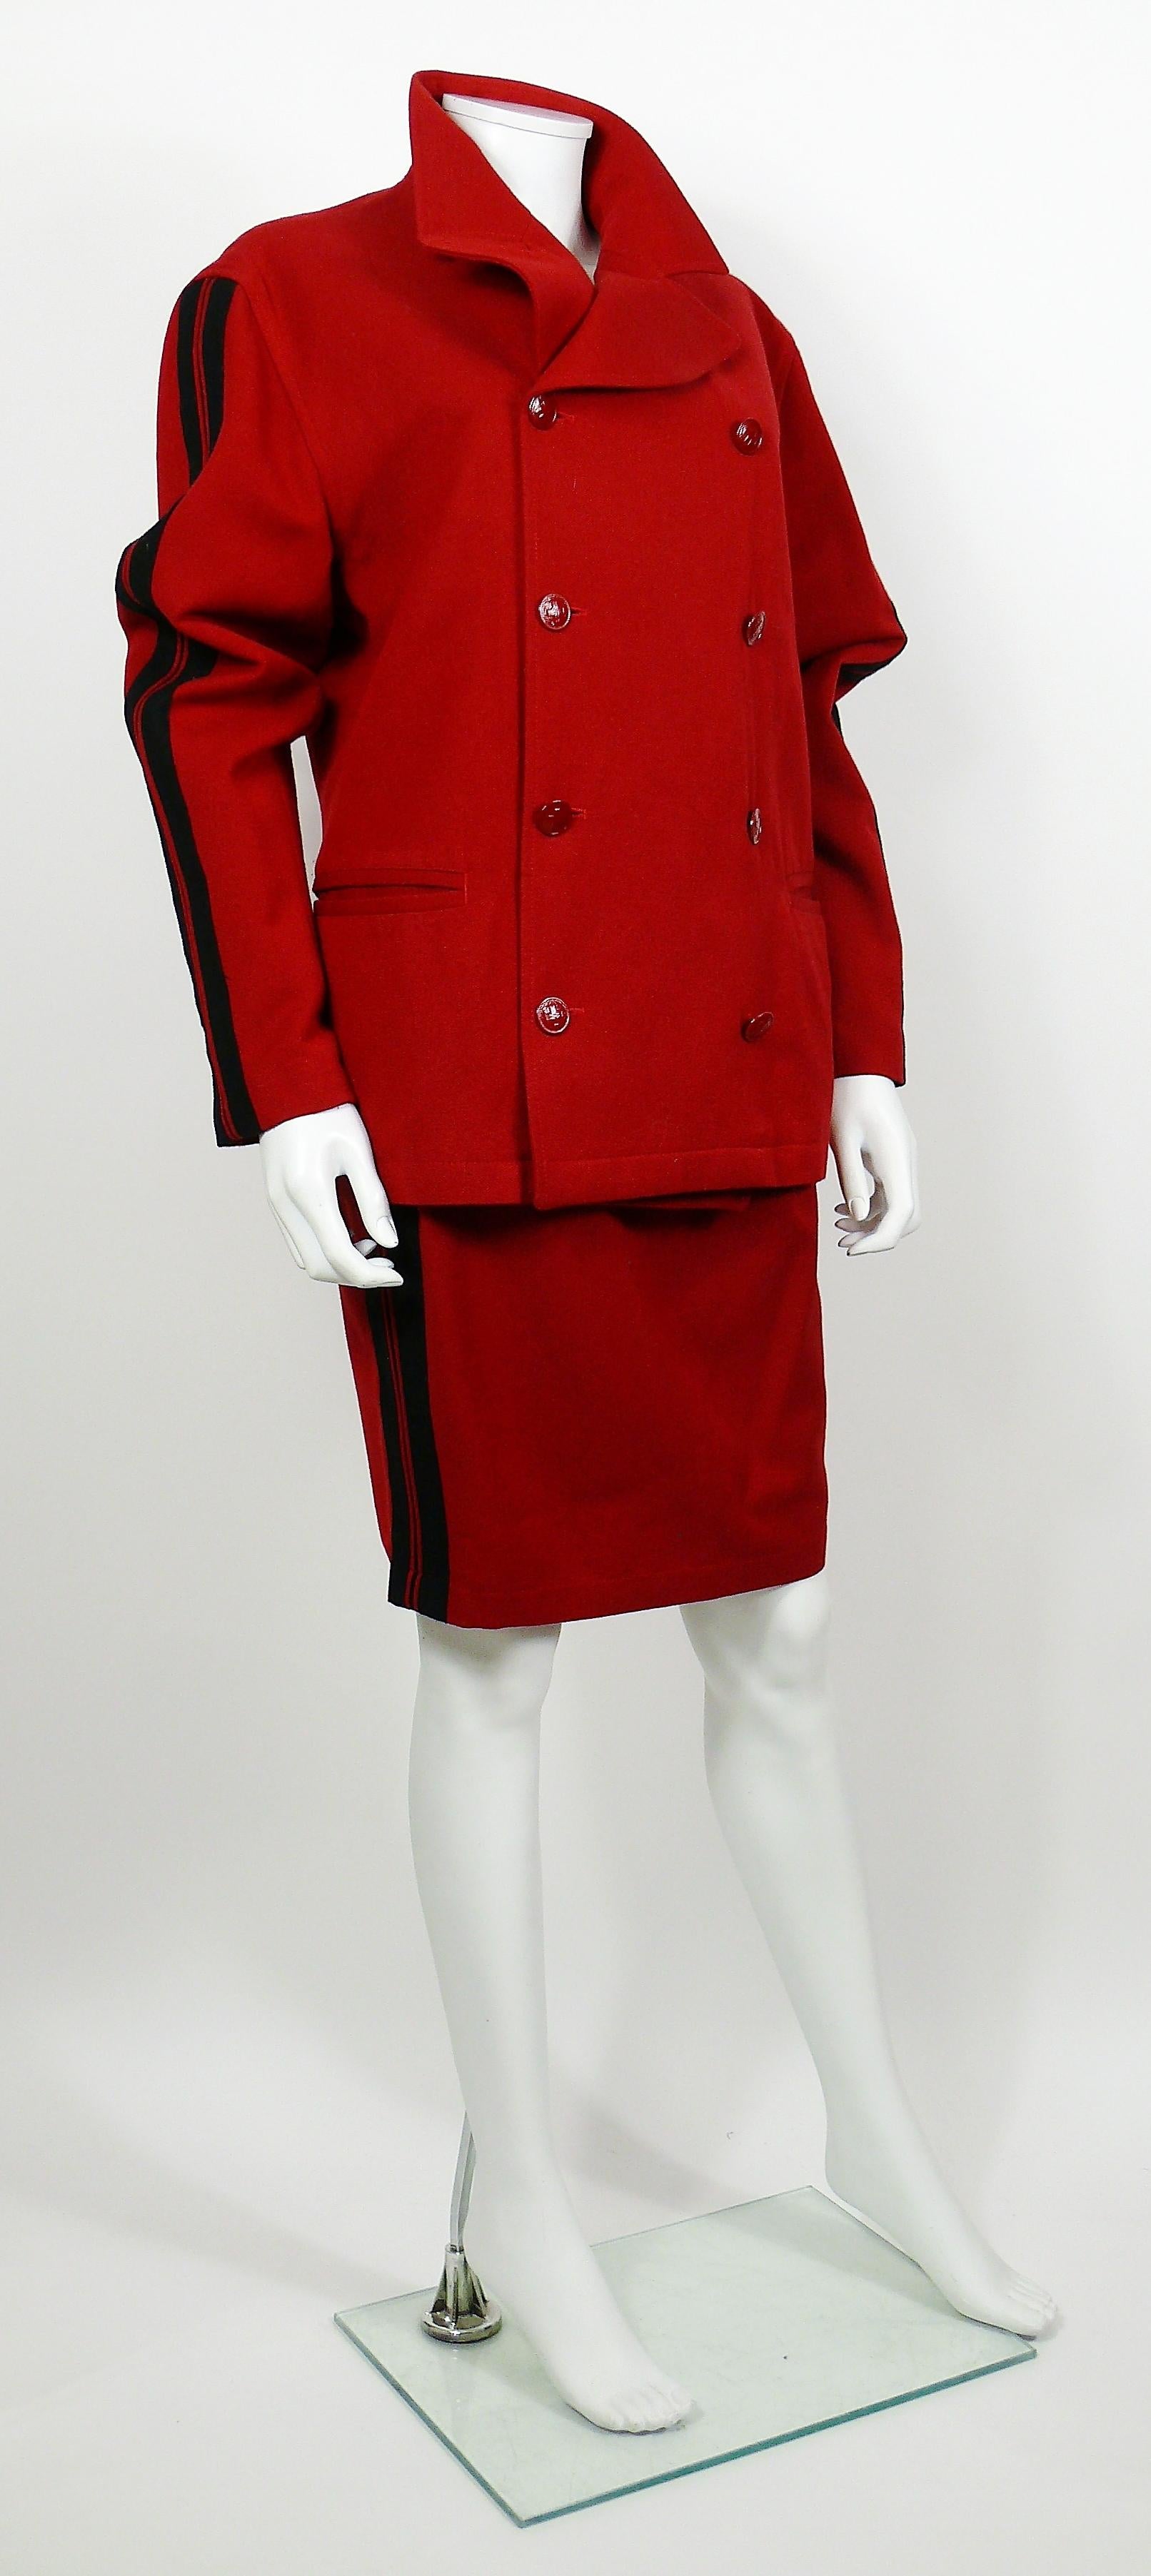 JEAN PAUL GAULTIER vintage red wool blend skirt suit.

BLAZER features :
- Red wool blend with black stripes on the sleeves.
- Double breasted.
- Lapel collar.
- Red enamel buttons.
- Two pockets.
- Fully lined.

SKIRT features :
- Red wool blend